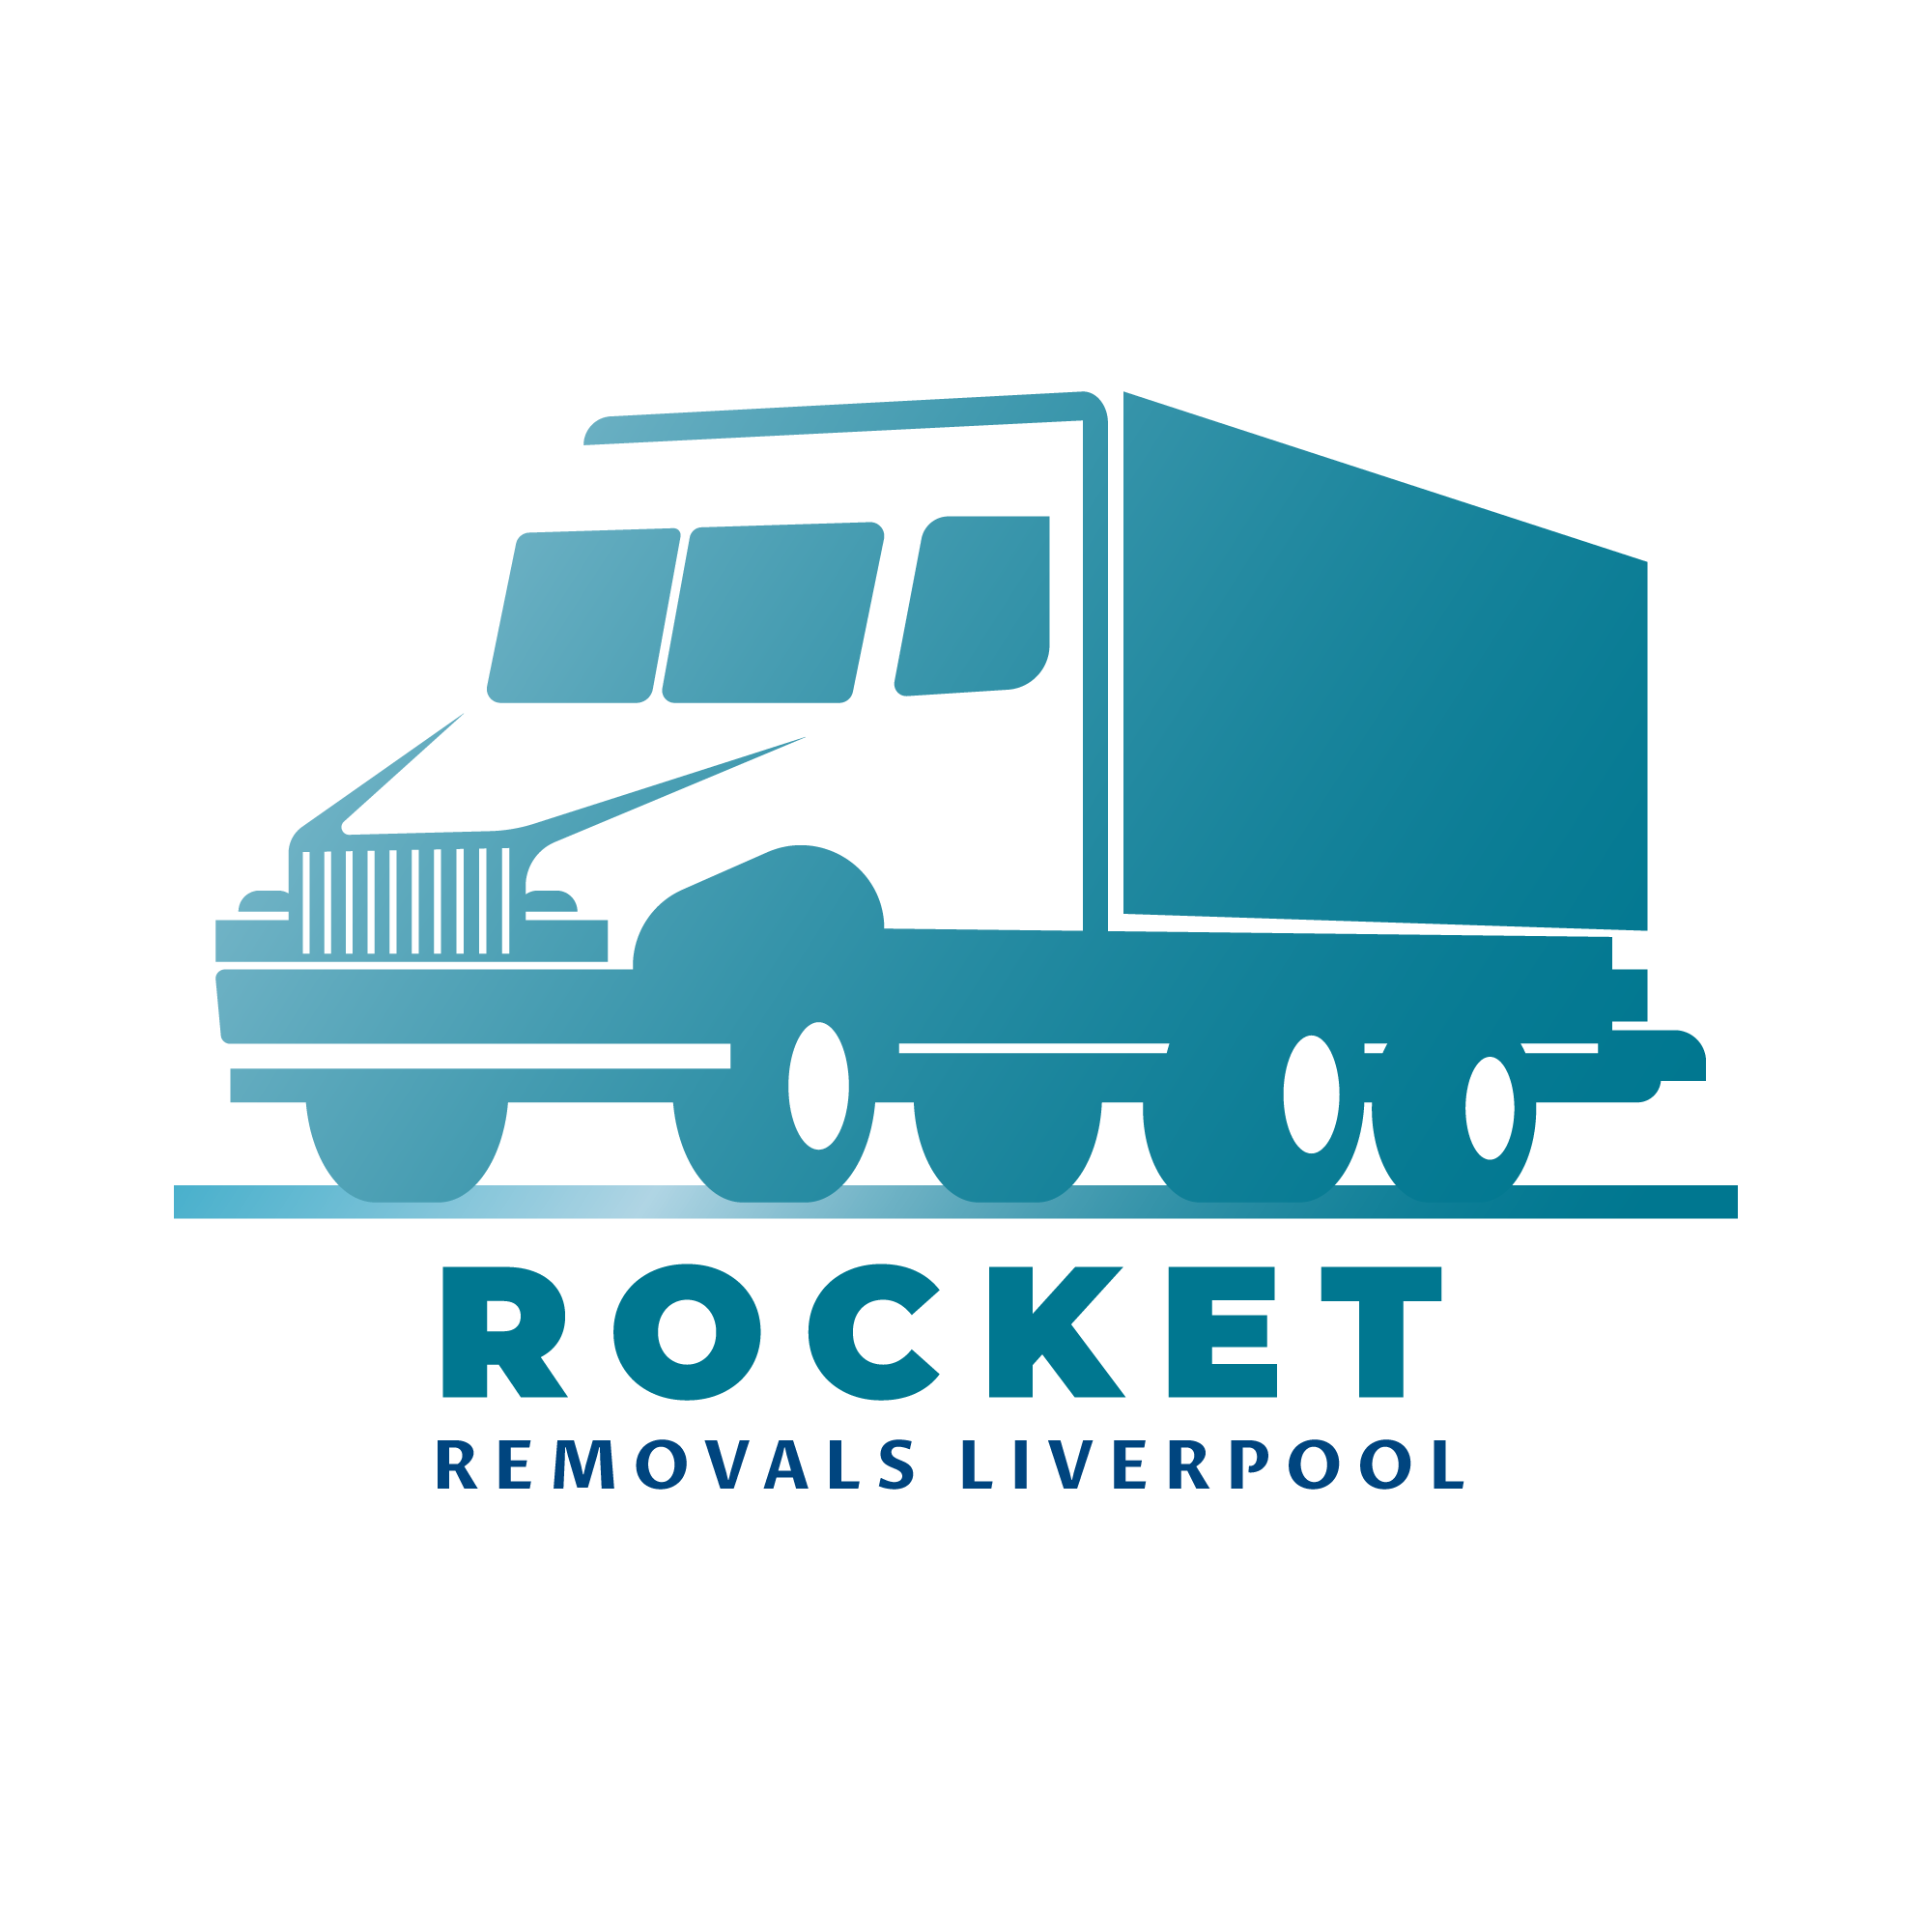 Rocket Removals Liverpool Boasts Positive Reviews from Clients